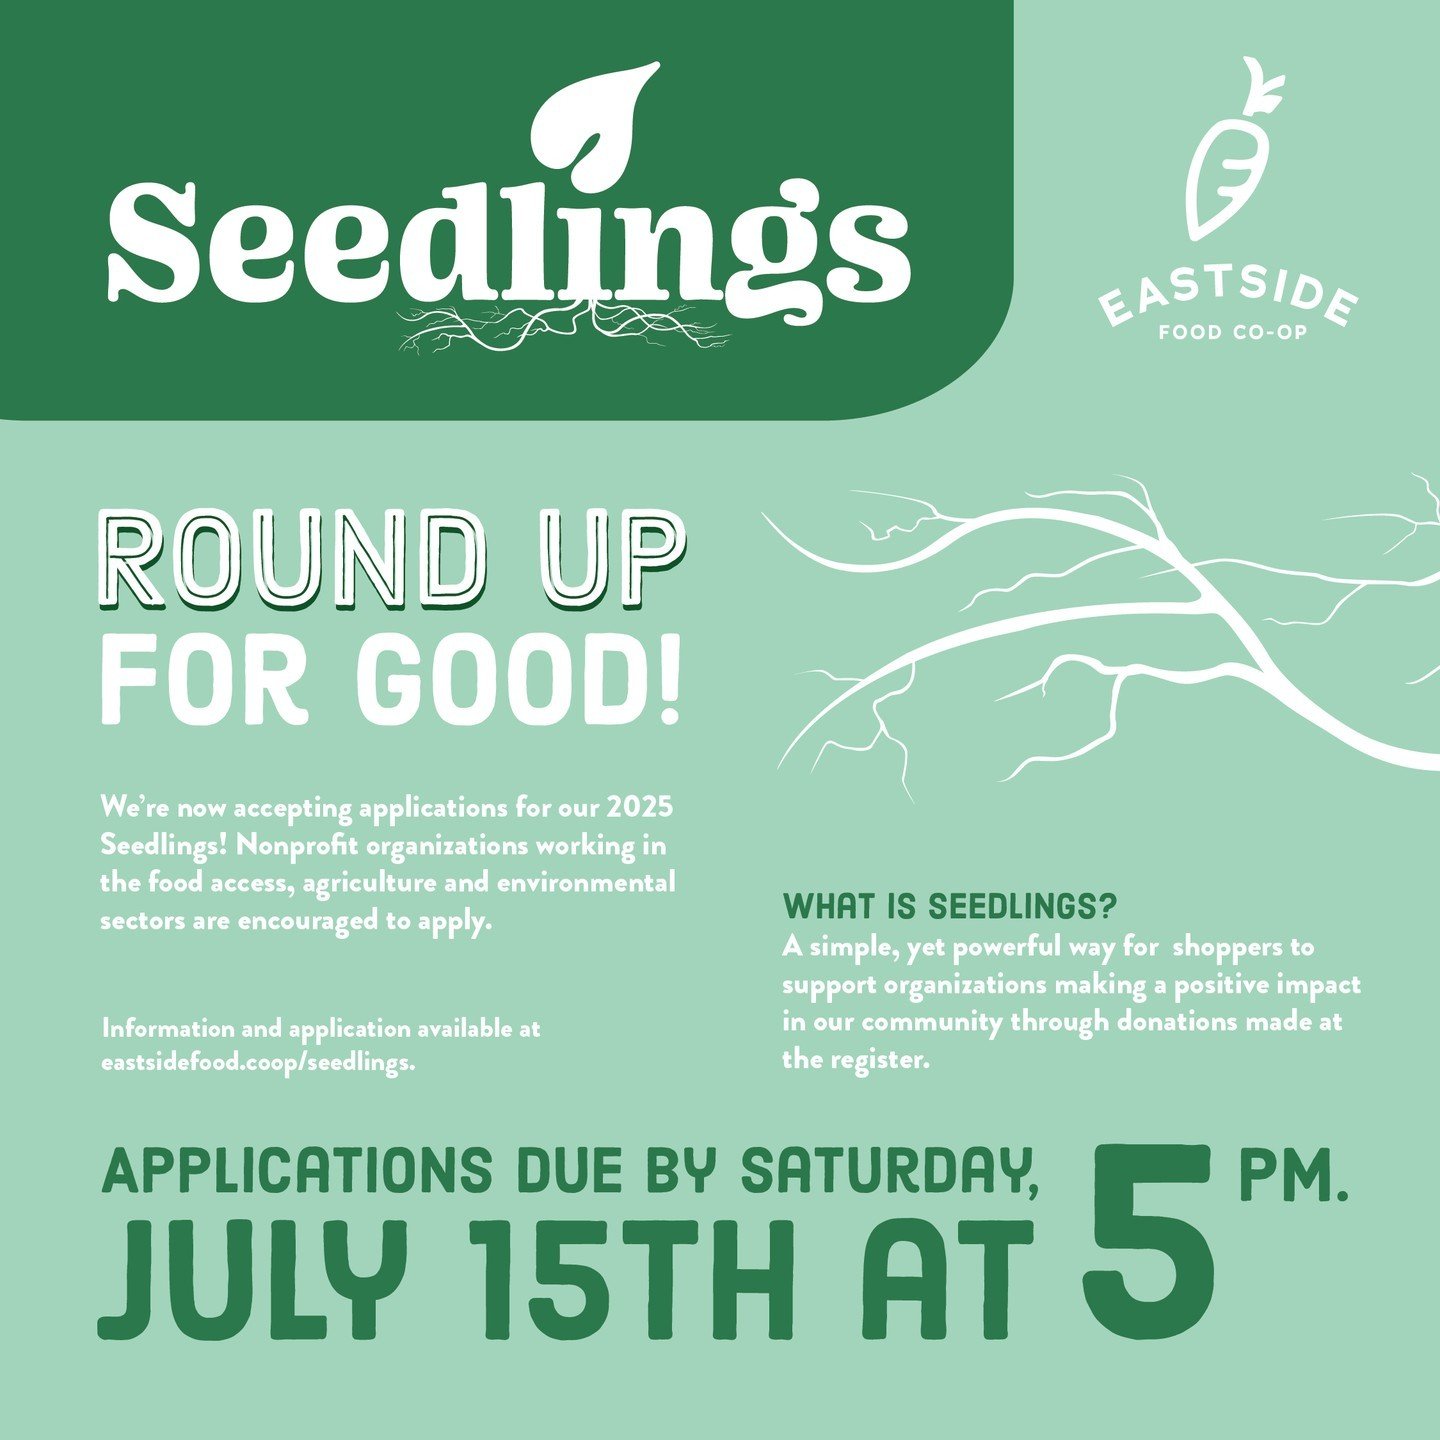 🌱 Applications are now open for our 2025 Seedlings program! 🌱
 
🌷 Eastside Food Co-op&rsquo;s Seedlings program makes it simple for shoppers to support organizations making a positive impact in our community. Shoppers make small donations at the r